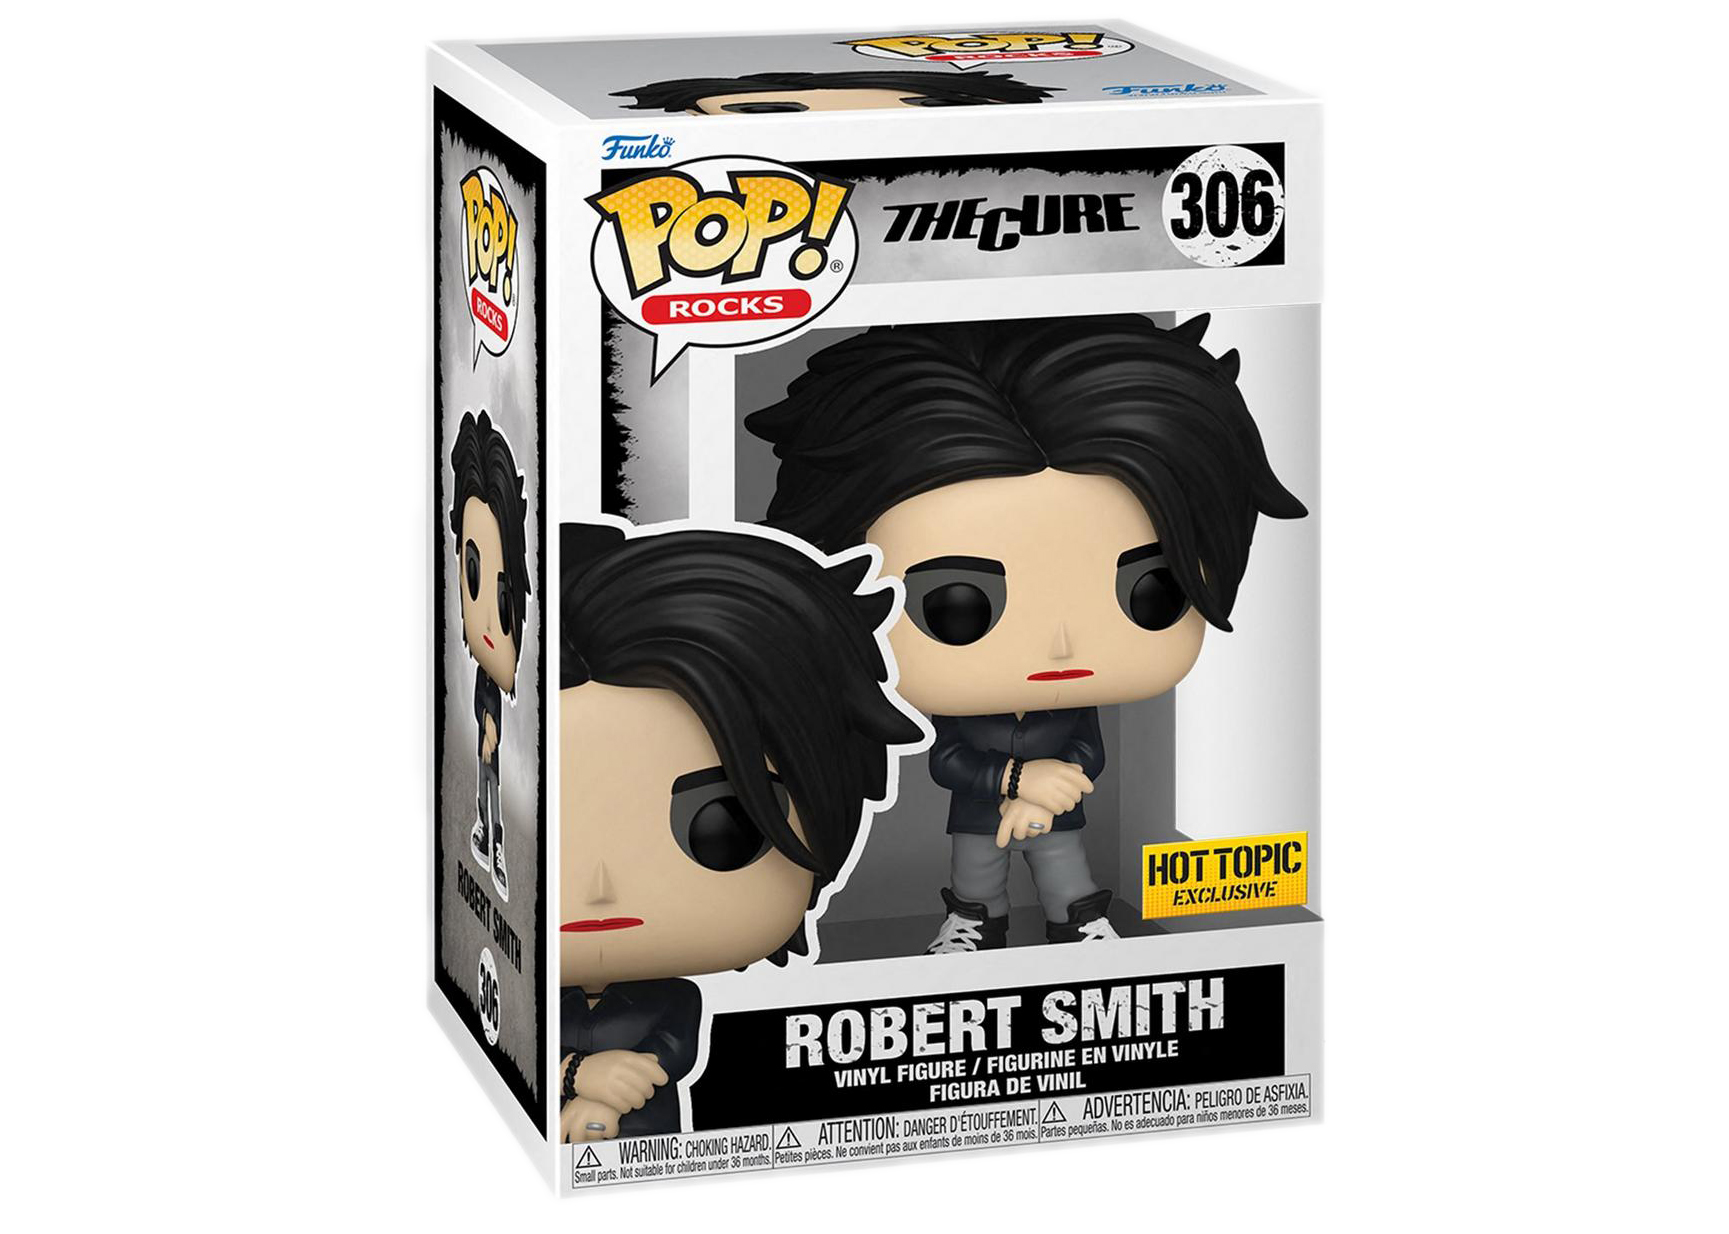 Funko Pop! Rocks The Cure Robert Smith Hot Topic Exclusive